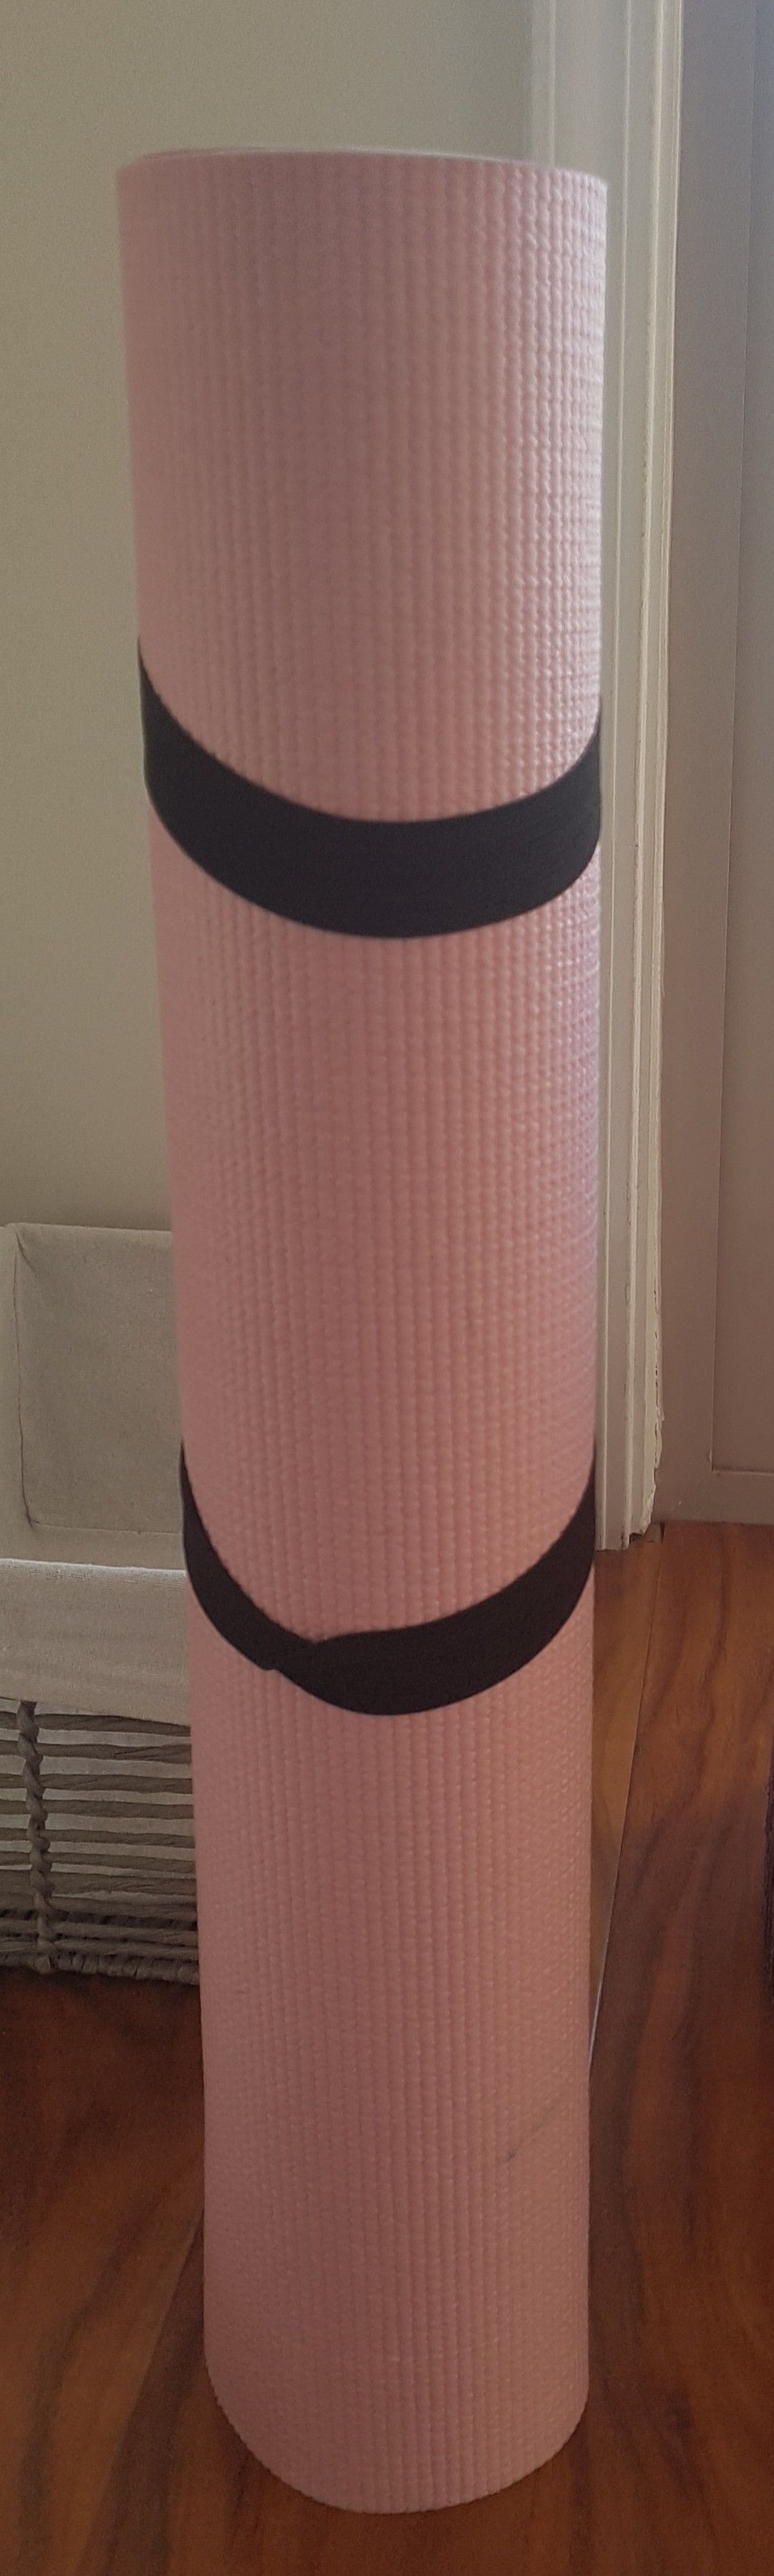 Pink yoga mat with strap holder